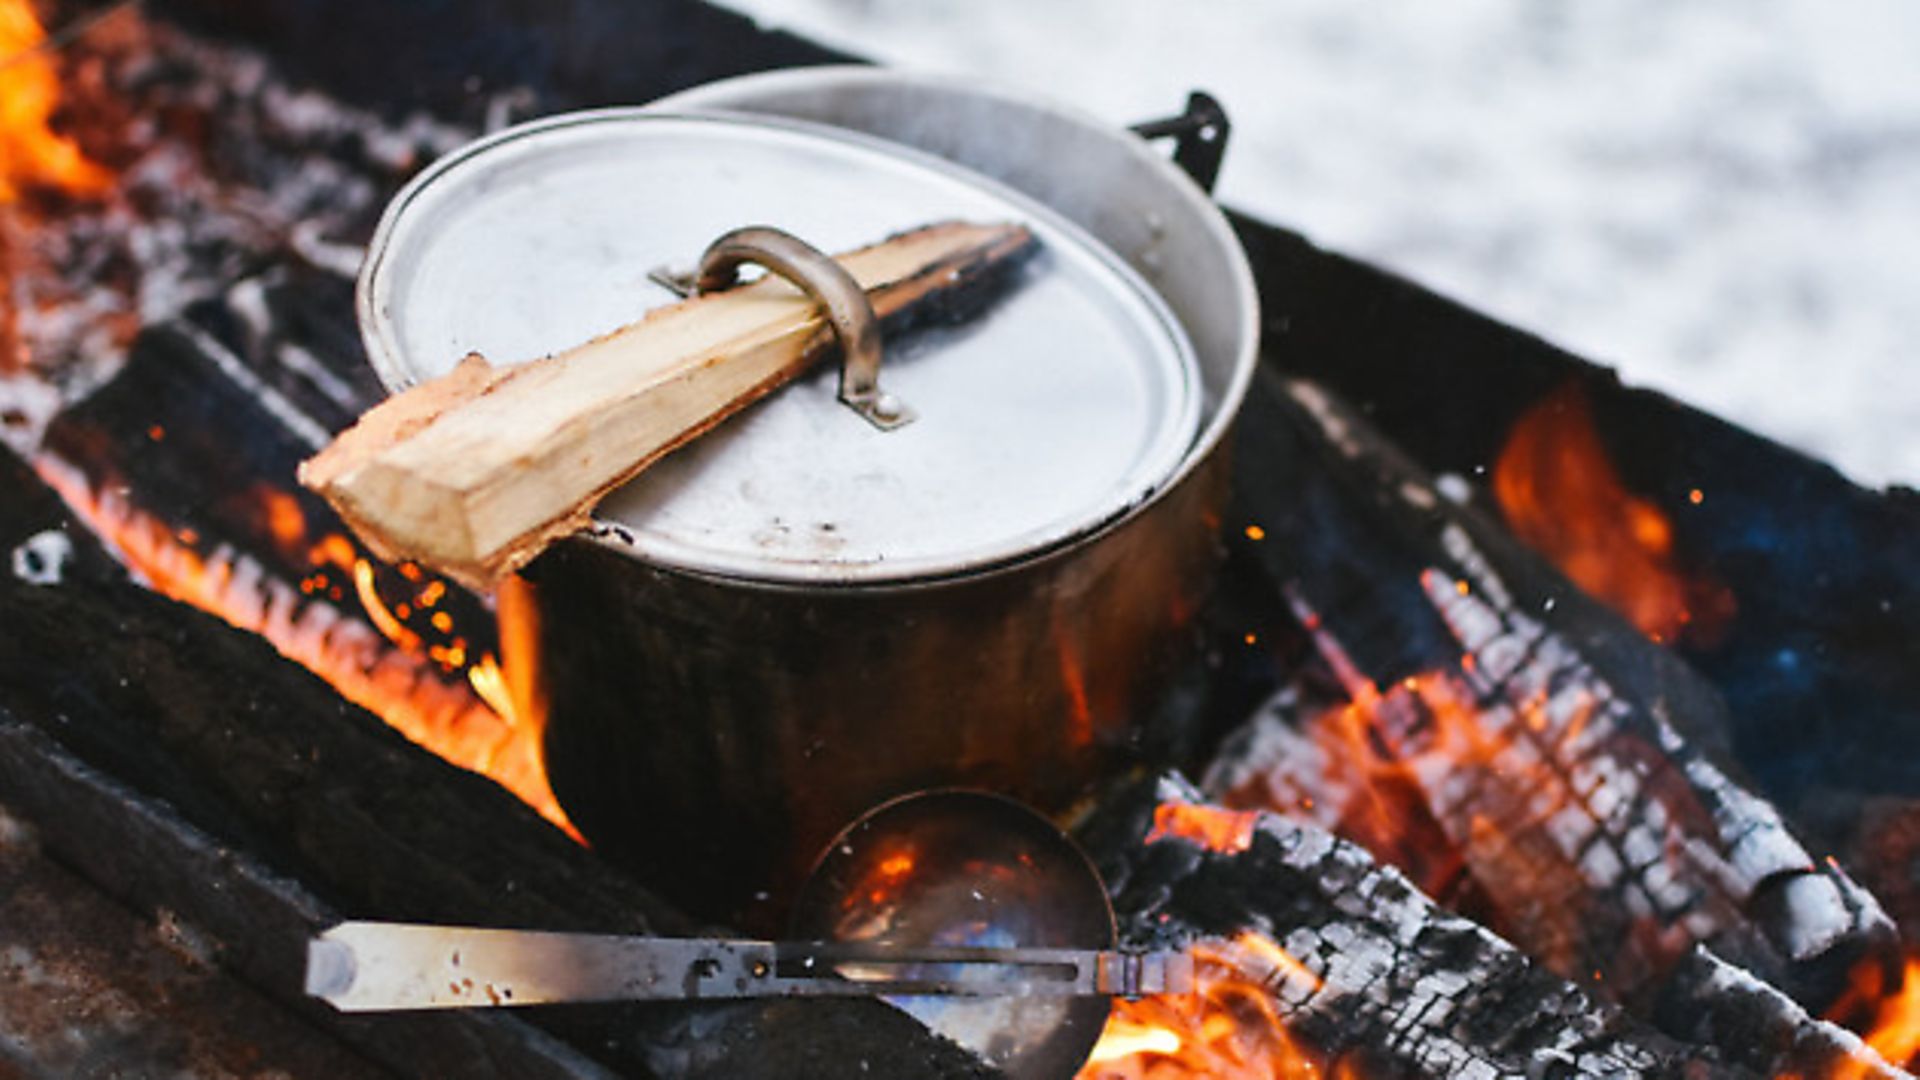 Outdoor cooking - Credit: Archant